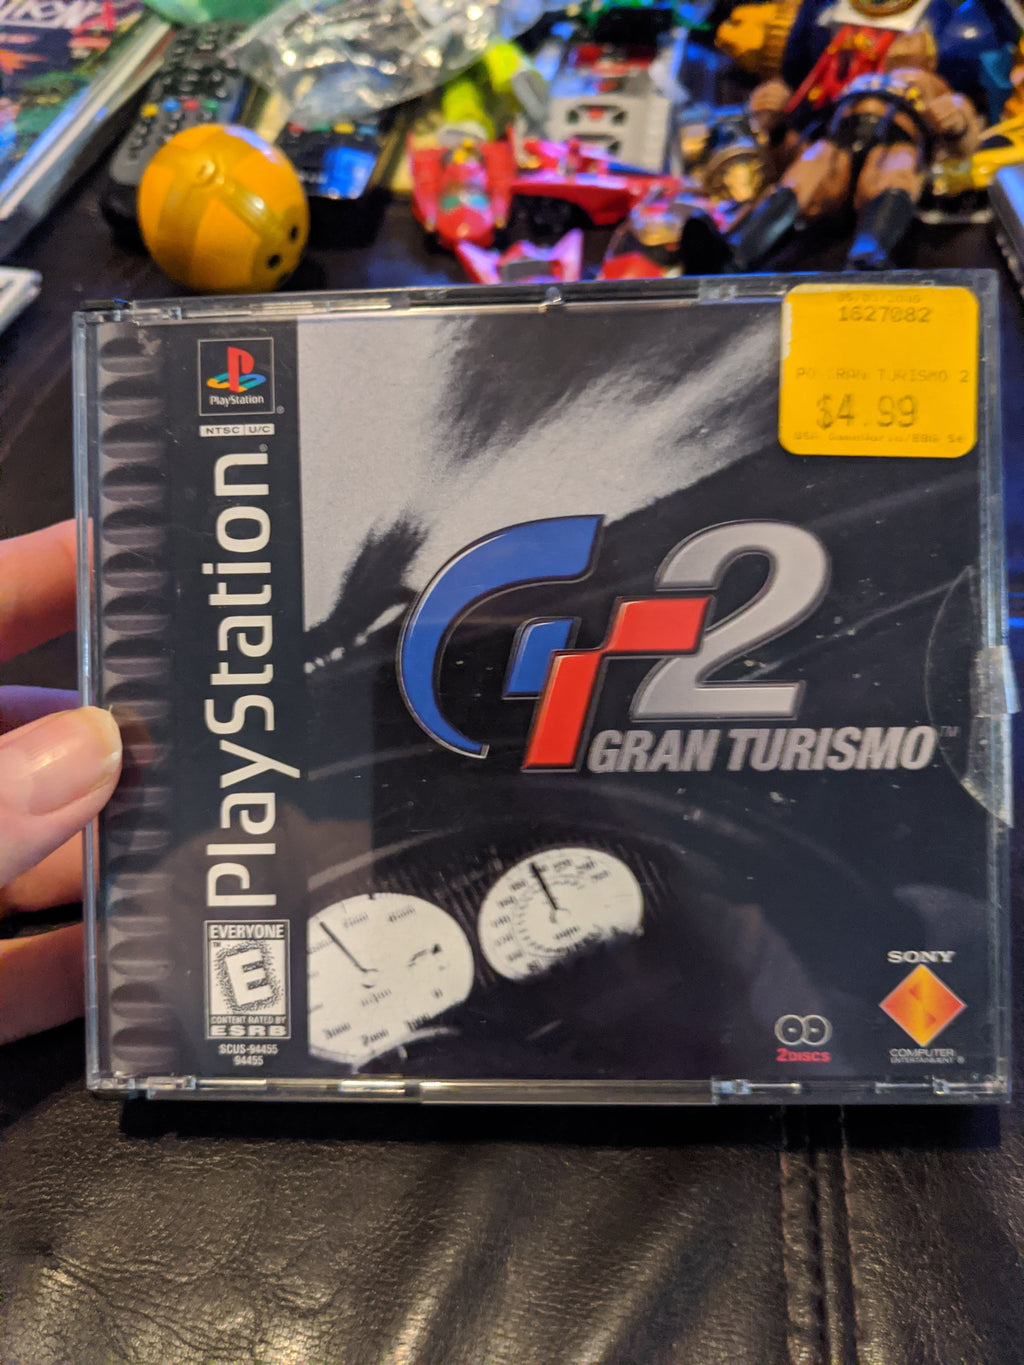 Playstation 1 PS1 Sony Gran Turismo GT2 Racing 2 Disc Video Game Complete